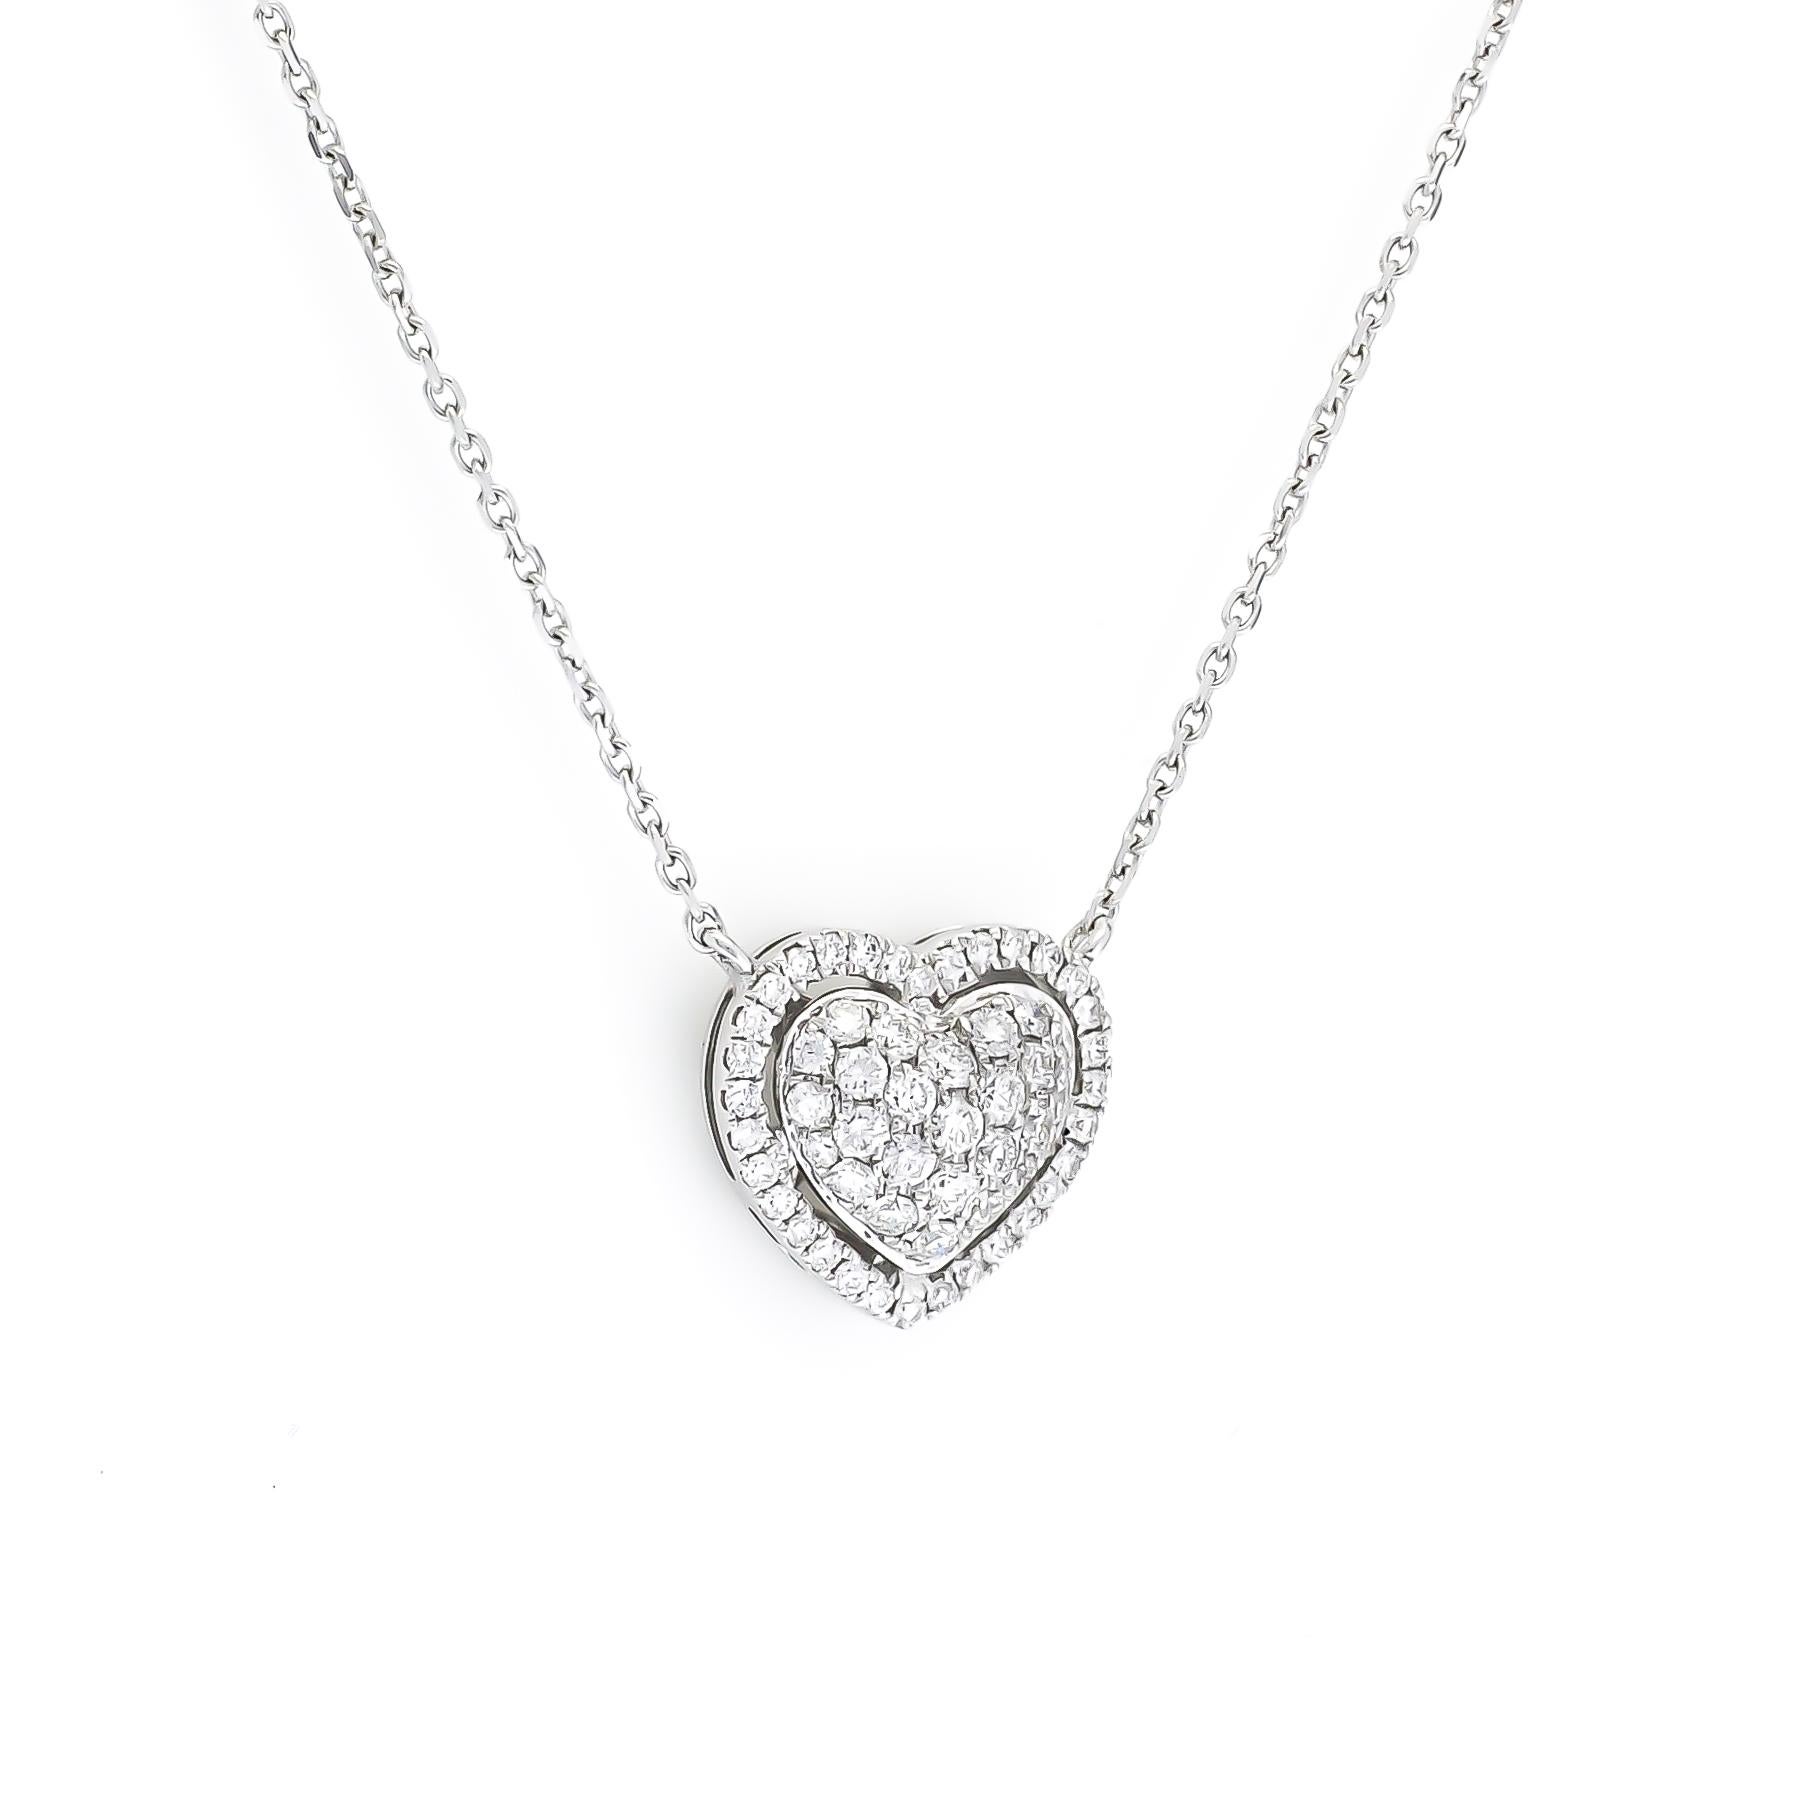 Round Cut Natural Diamond Pendant 0.55 cts 18KT White Gold Heart Pendant Necklace For Sale